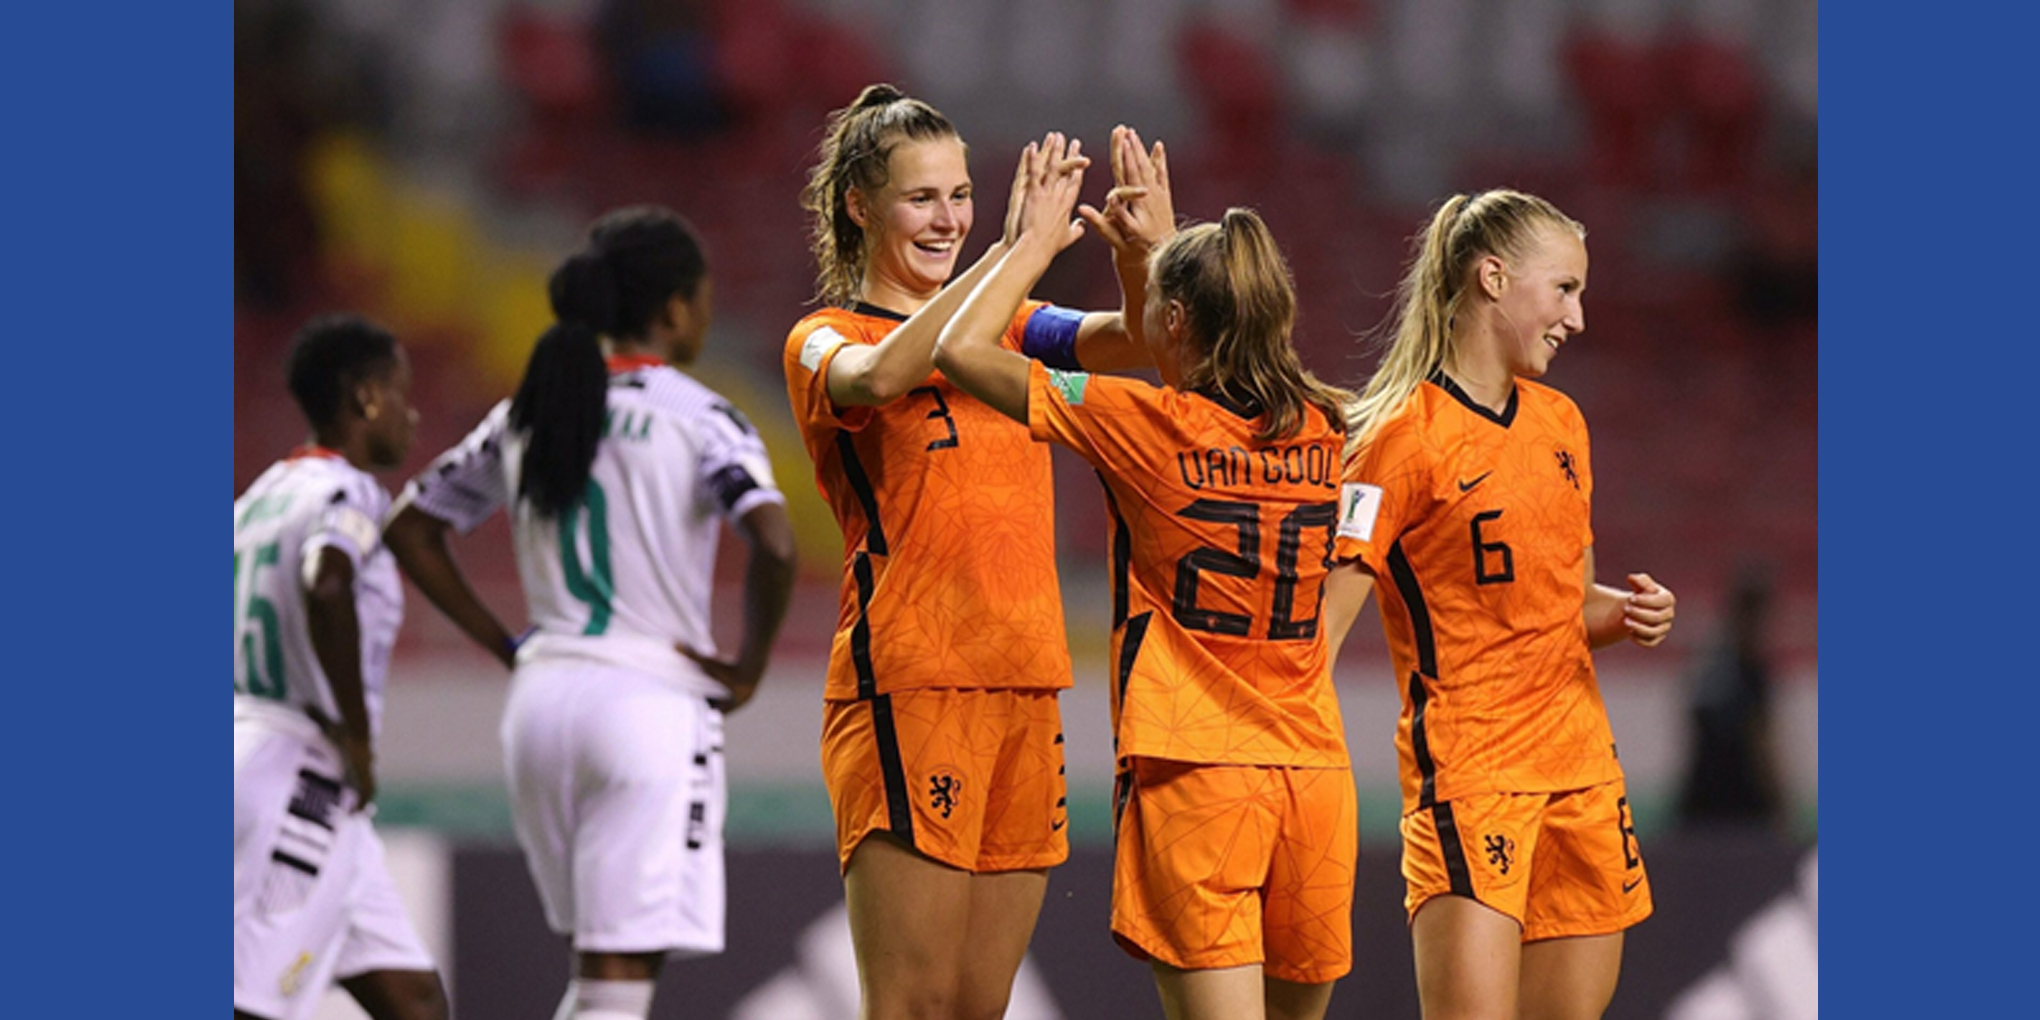 FIFA U20 WORLD CUP: The Black Princesses Exit The Tournament After Losing To Netherlands.